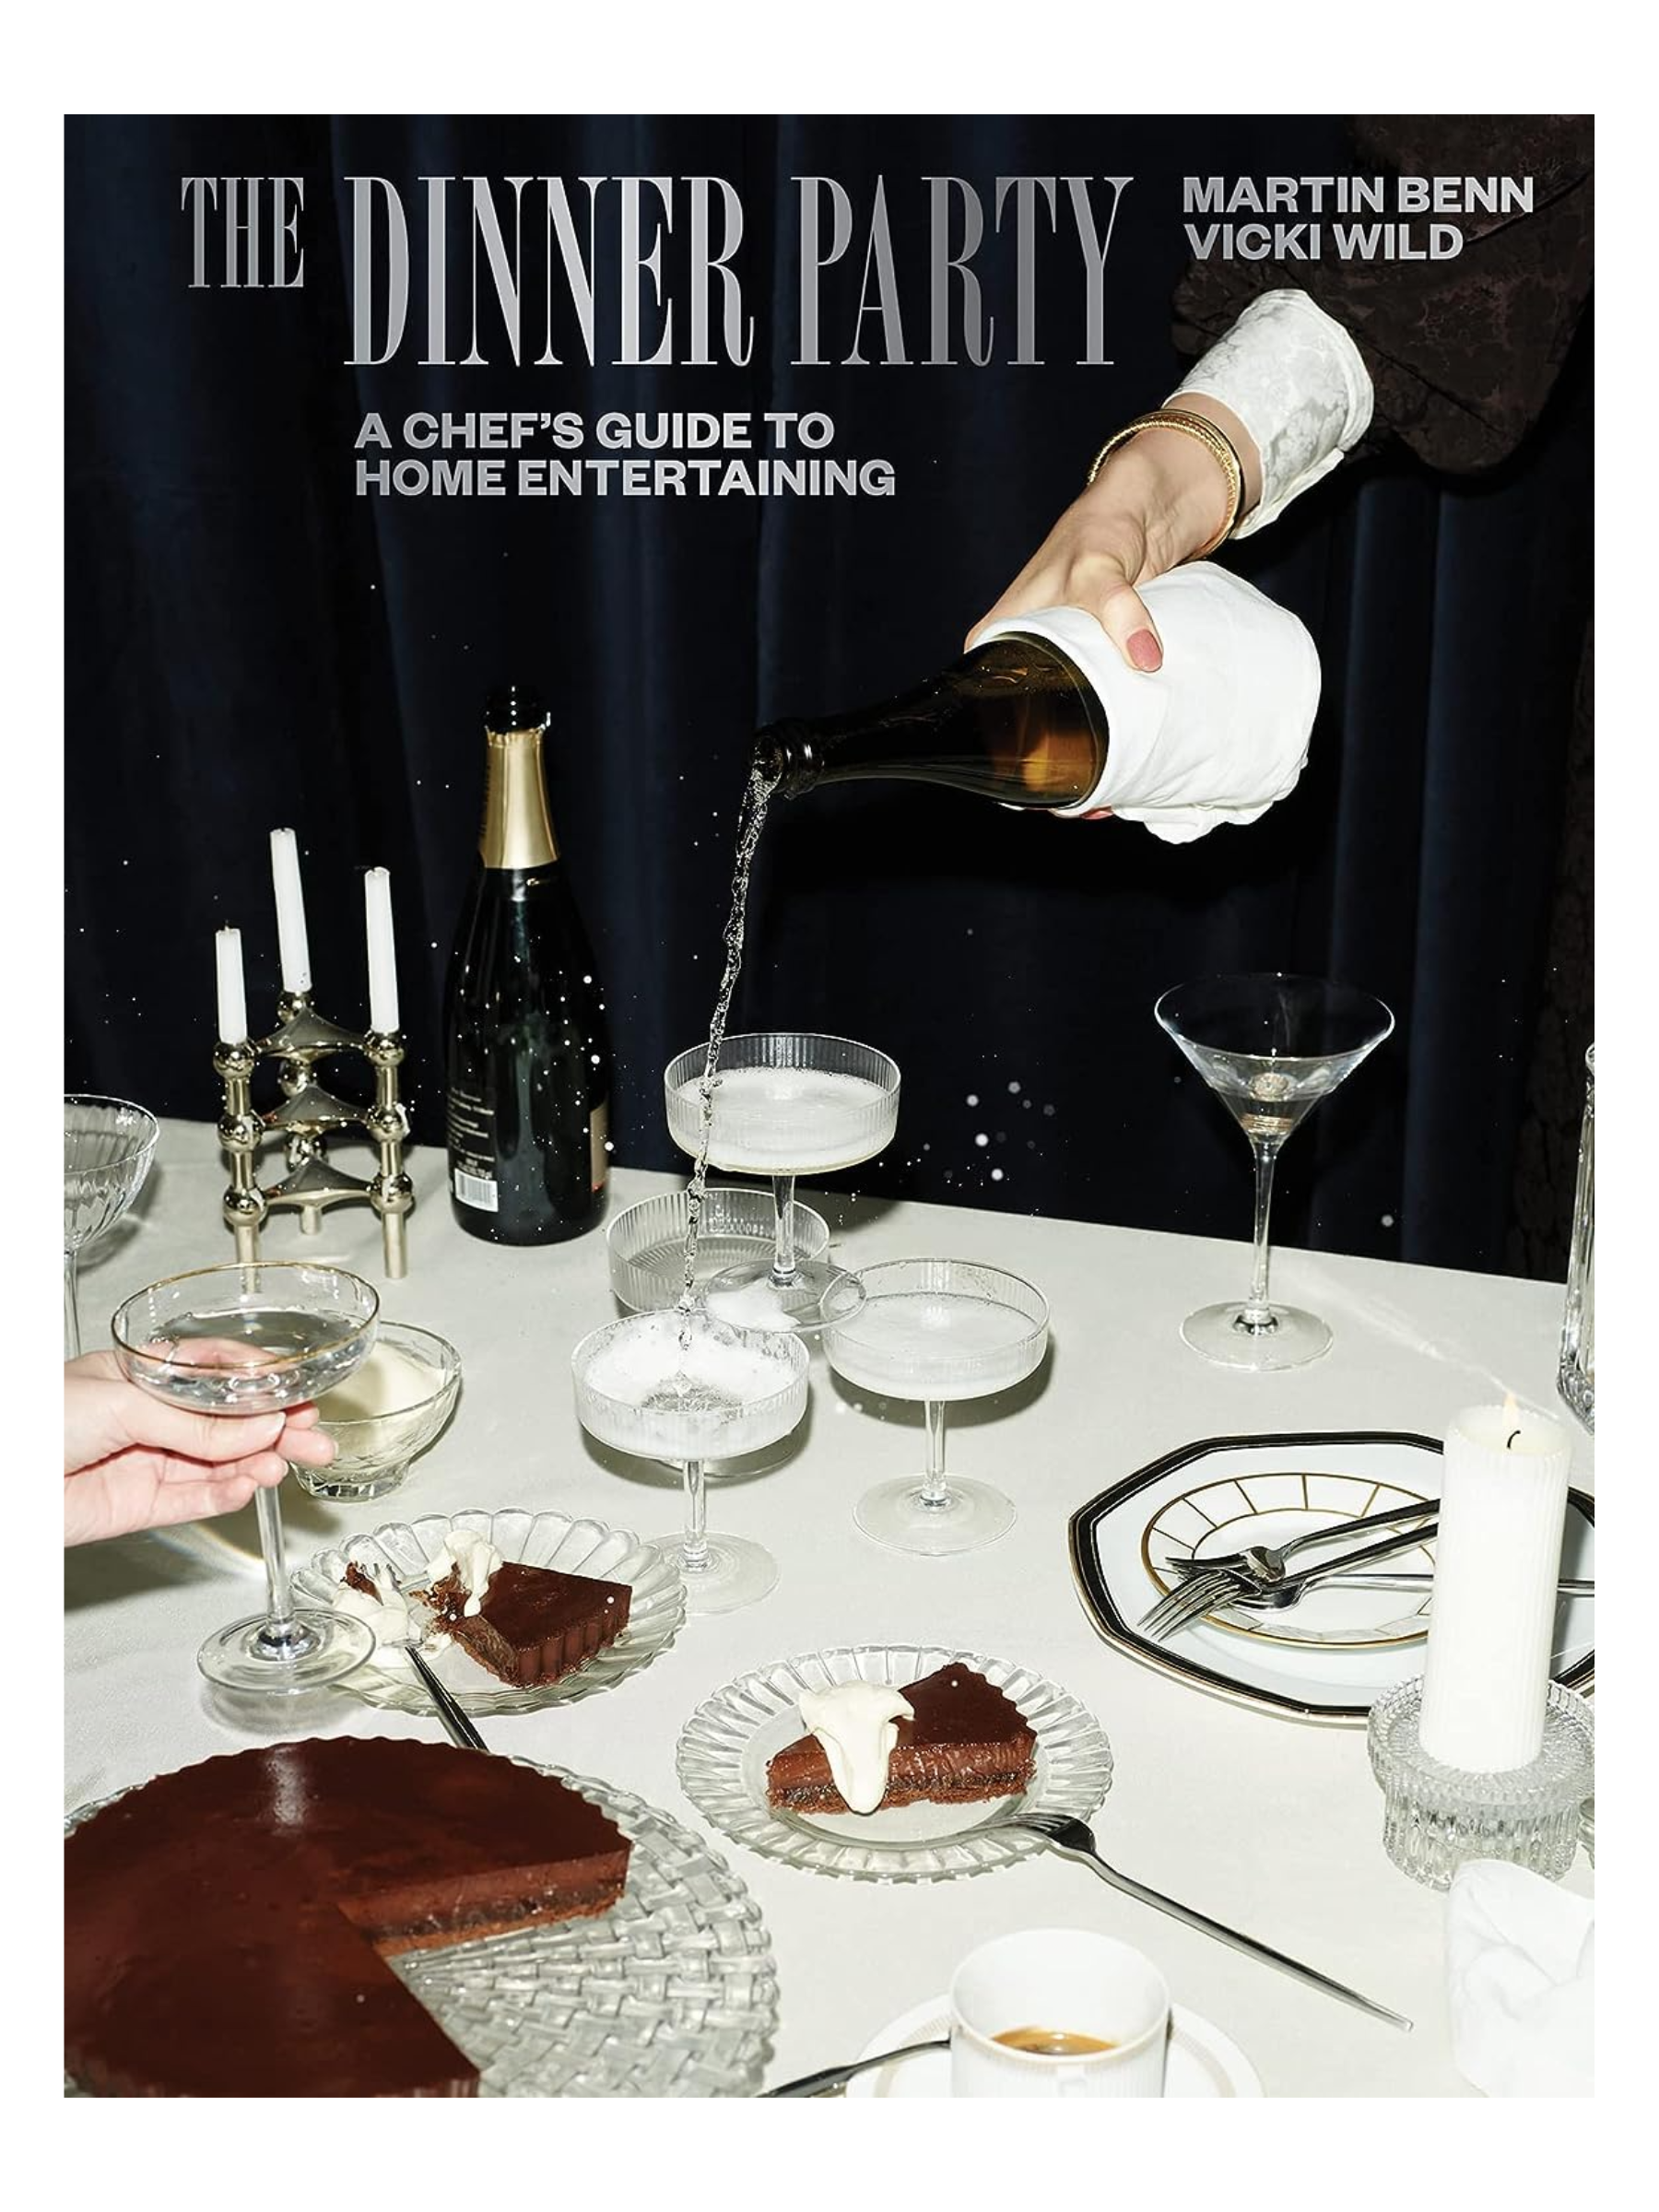 <p>Written by a husband-and-wife duo of chefs and home entertaining fanatics, this is the ultimate guide on how to throw a dinner party worth attending.</p> <p><em>Save on the best coffee table books with these <a href="https://www.glamour.com/coupons/amazon?mbid=synd_msn_rss&utm_source=msn&utm_medium=syndication">Amazon promo codes</a>.</em></p> $42, Amazon. <a href="https://www.amazon.com/Dinner-Party-Chefs-Guide-Entertaining/dp/1743798962/">Get it now!</a><p>Sign up for today’s biggest stories, from pop culture to politics.</p><a href="https://www.glamour.com/newsletter/news?sourceCode=msnsend">Sign Up</a>